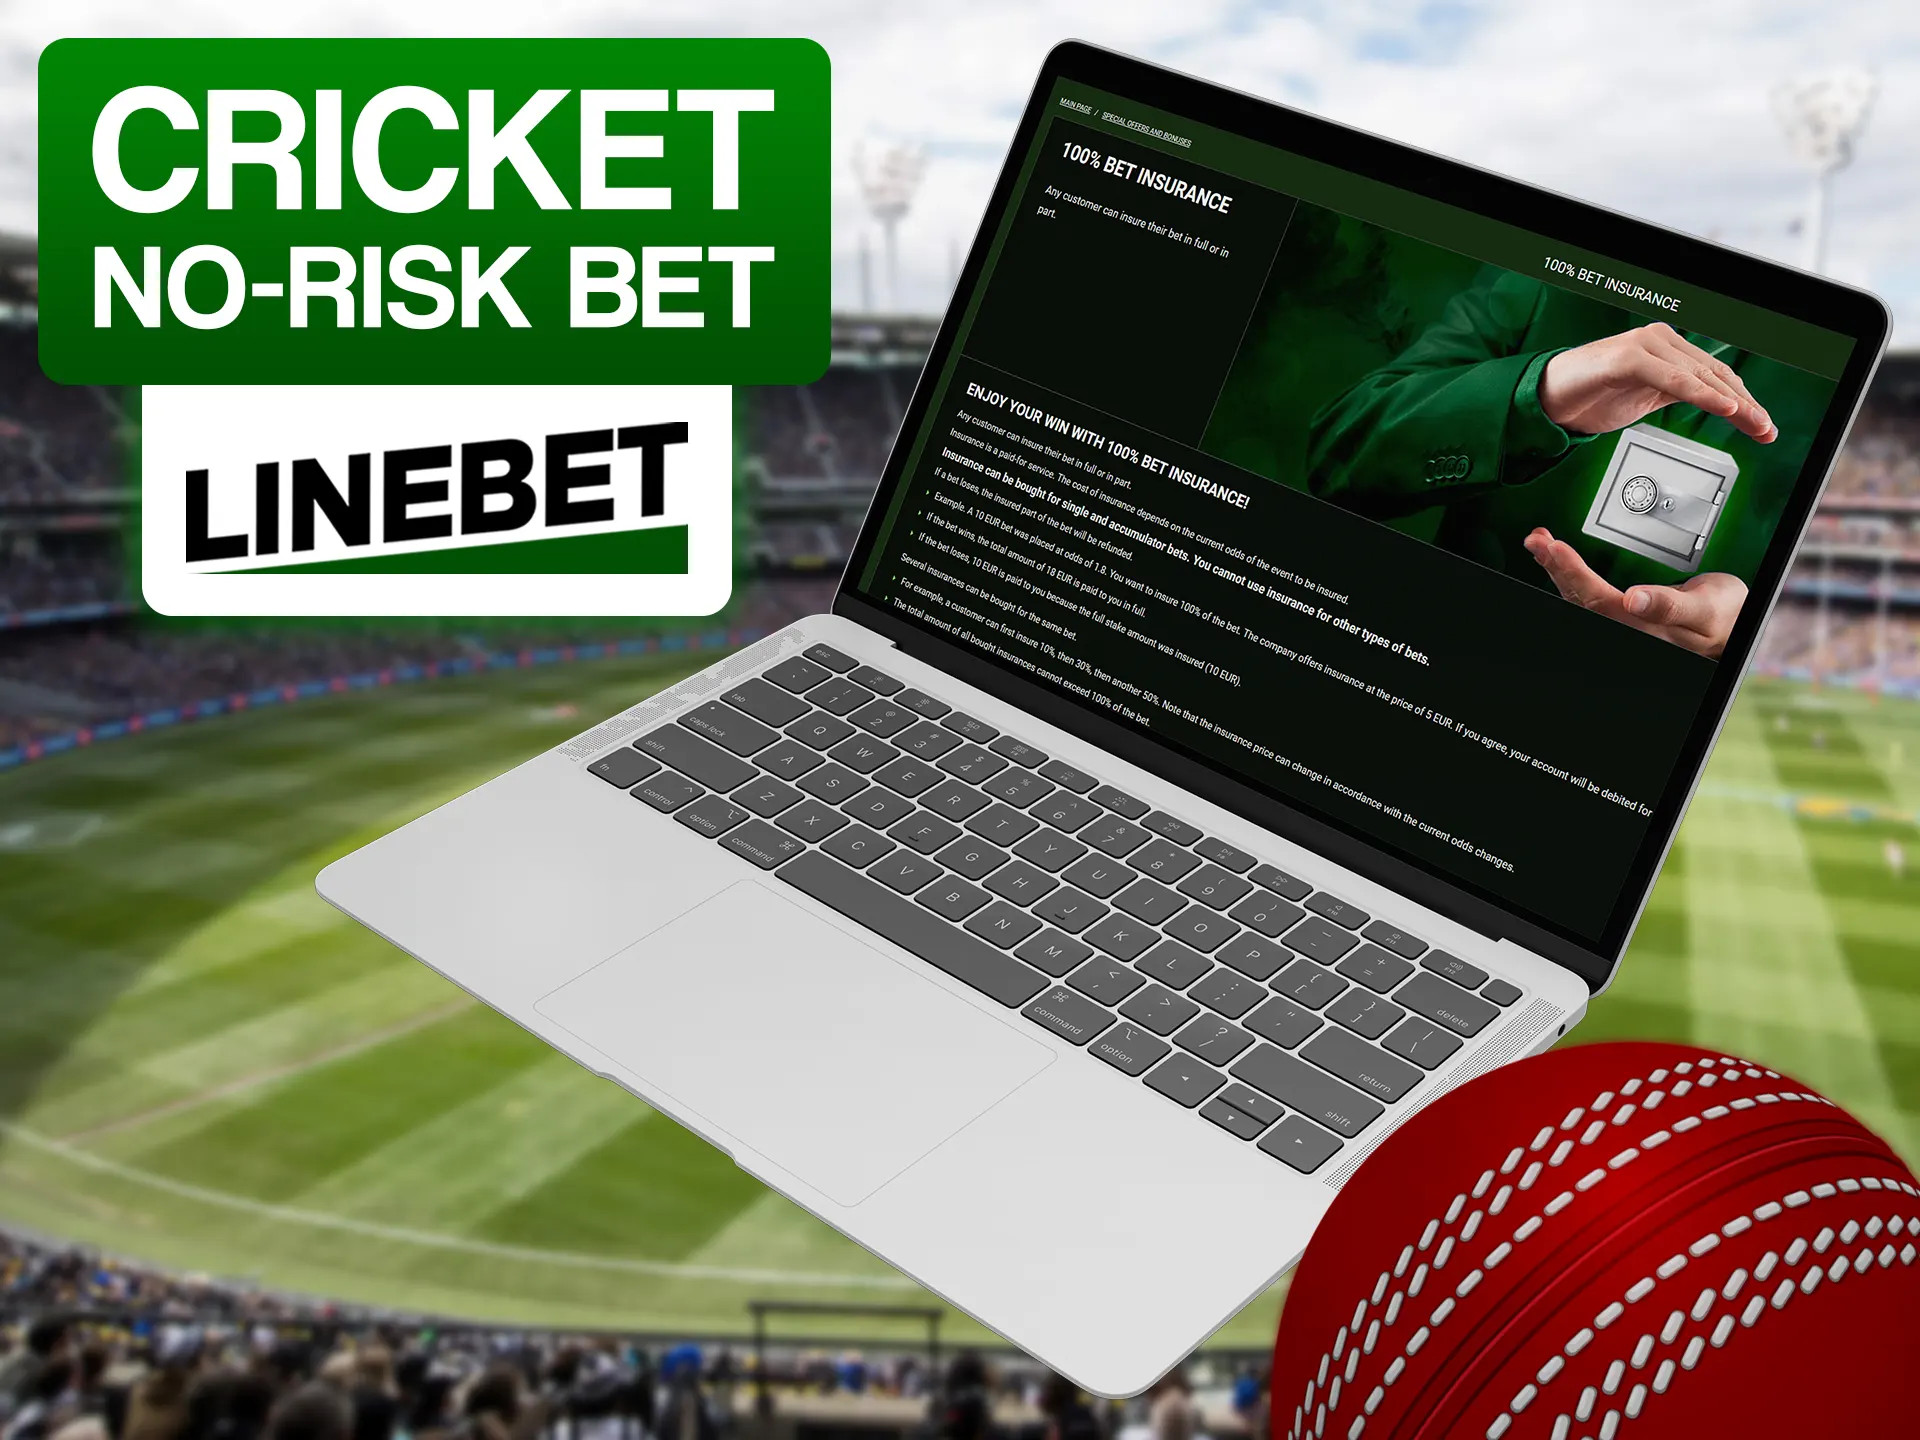 Make free bets on some of cricket matches at Linebet.